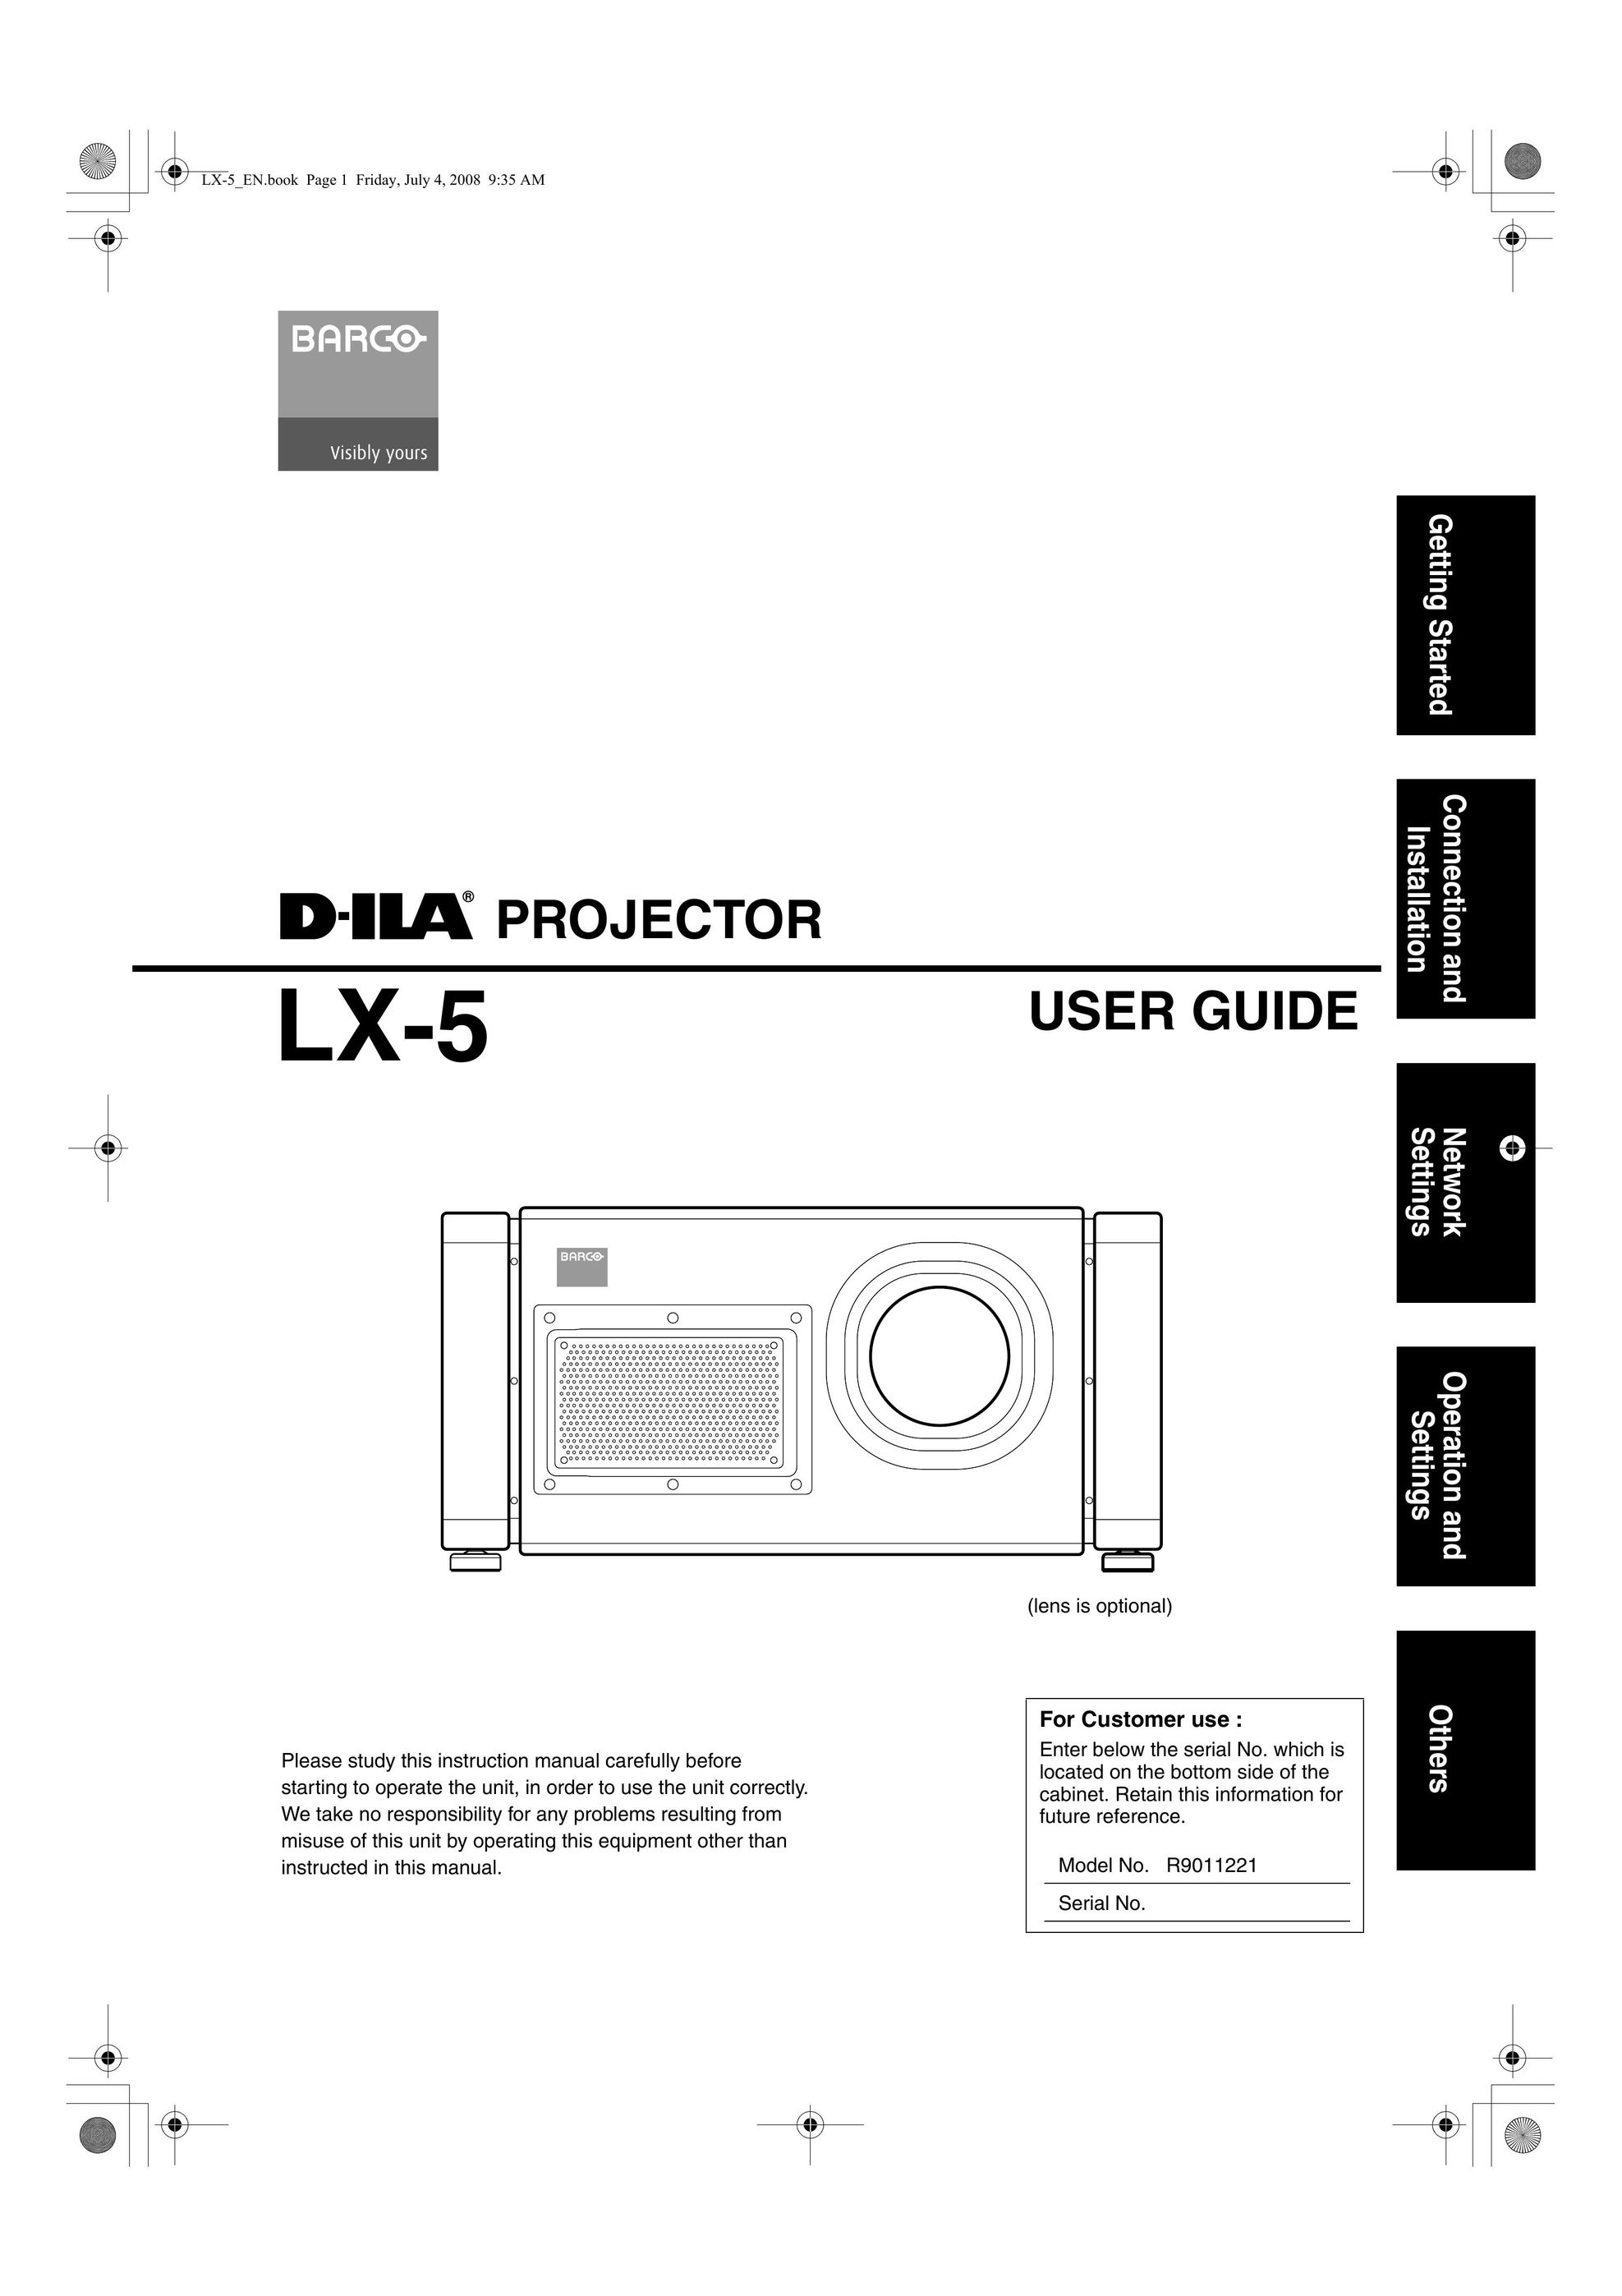 Barco LX-5 Projector User Manual